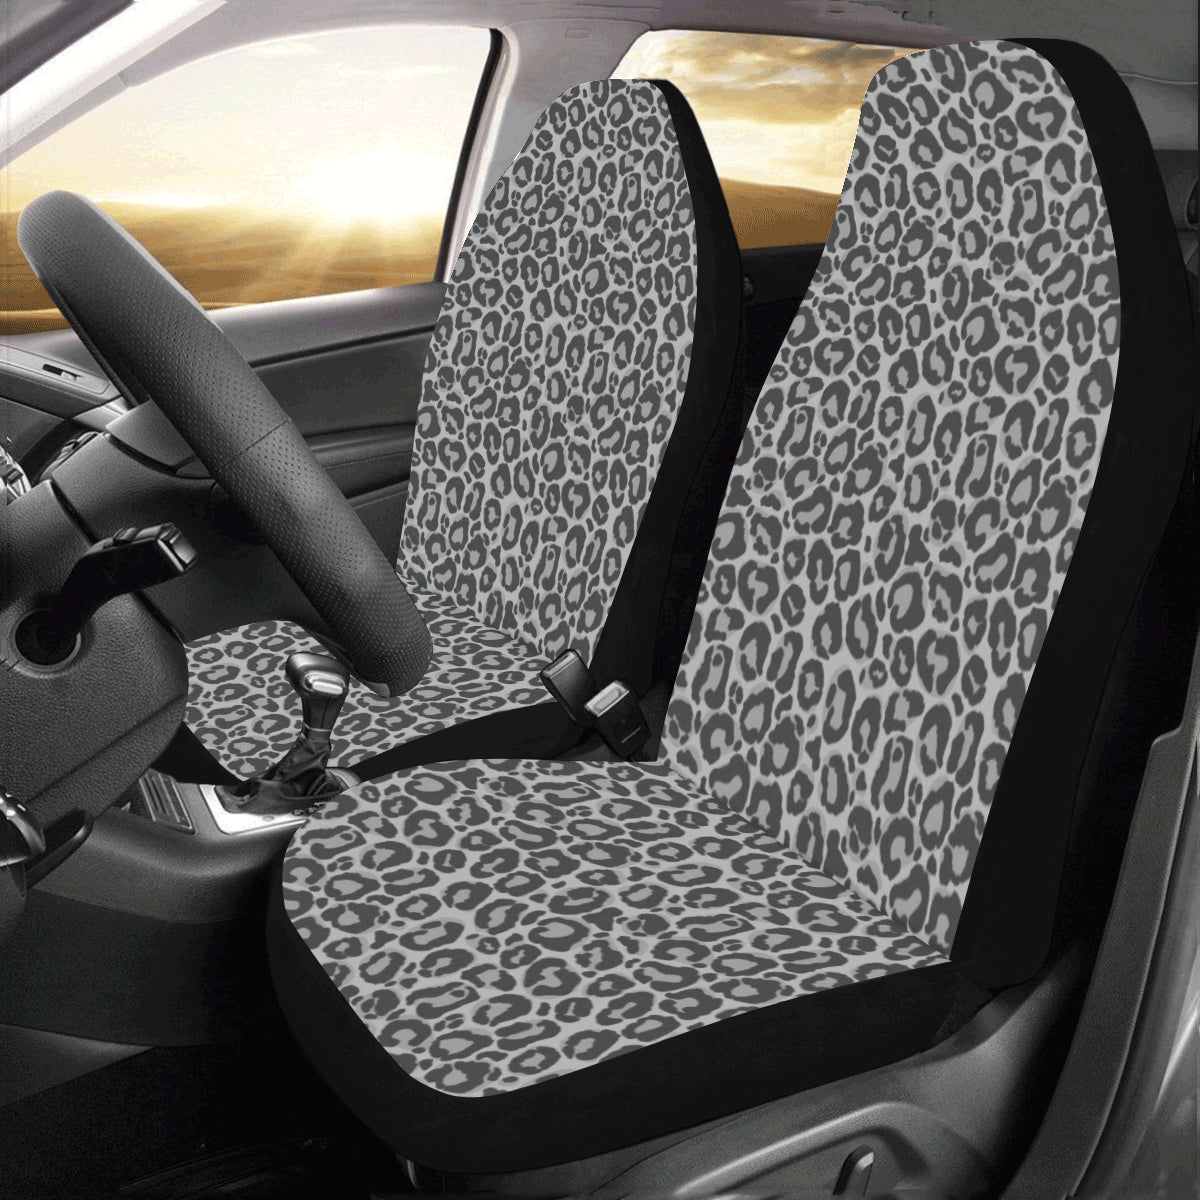 Leopard Car Seat Covers for Vehicle 2 pc, Grey Animal Print Black Pattern Front Seat Covers, Car SUV Gift Her Protector Accessory Decoration Starcove Fashion